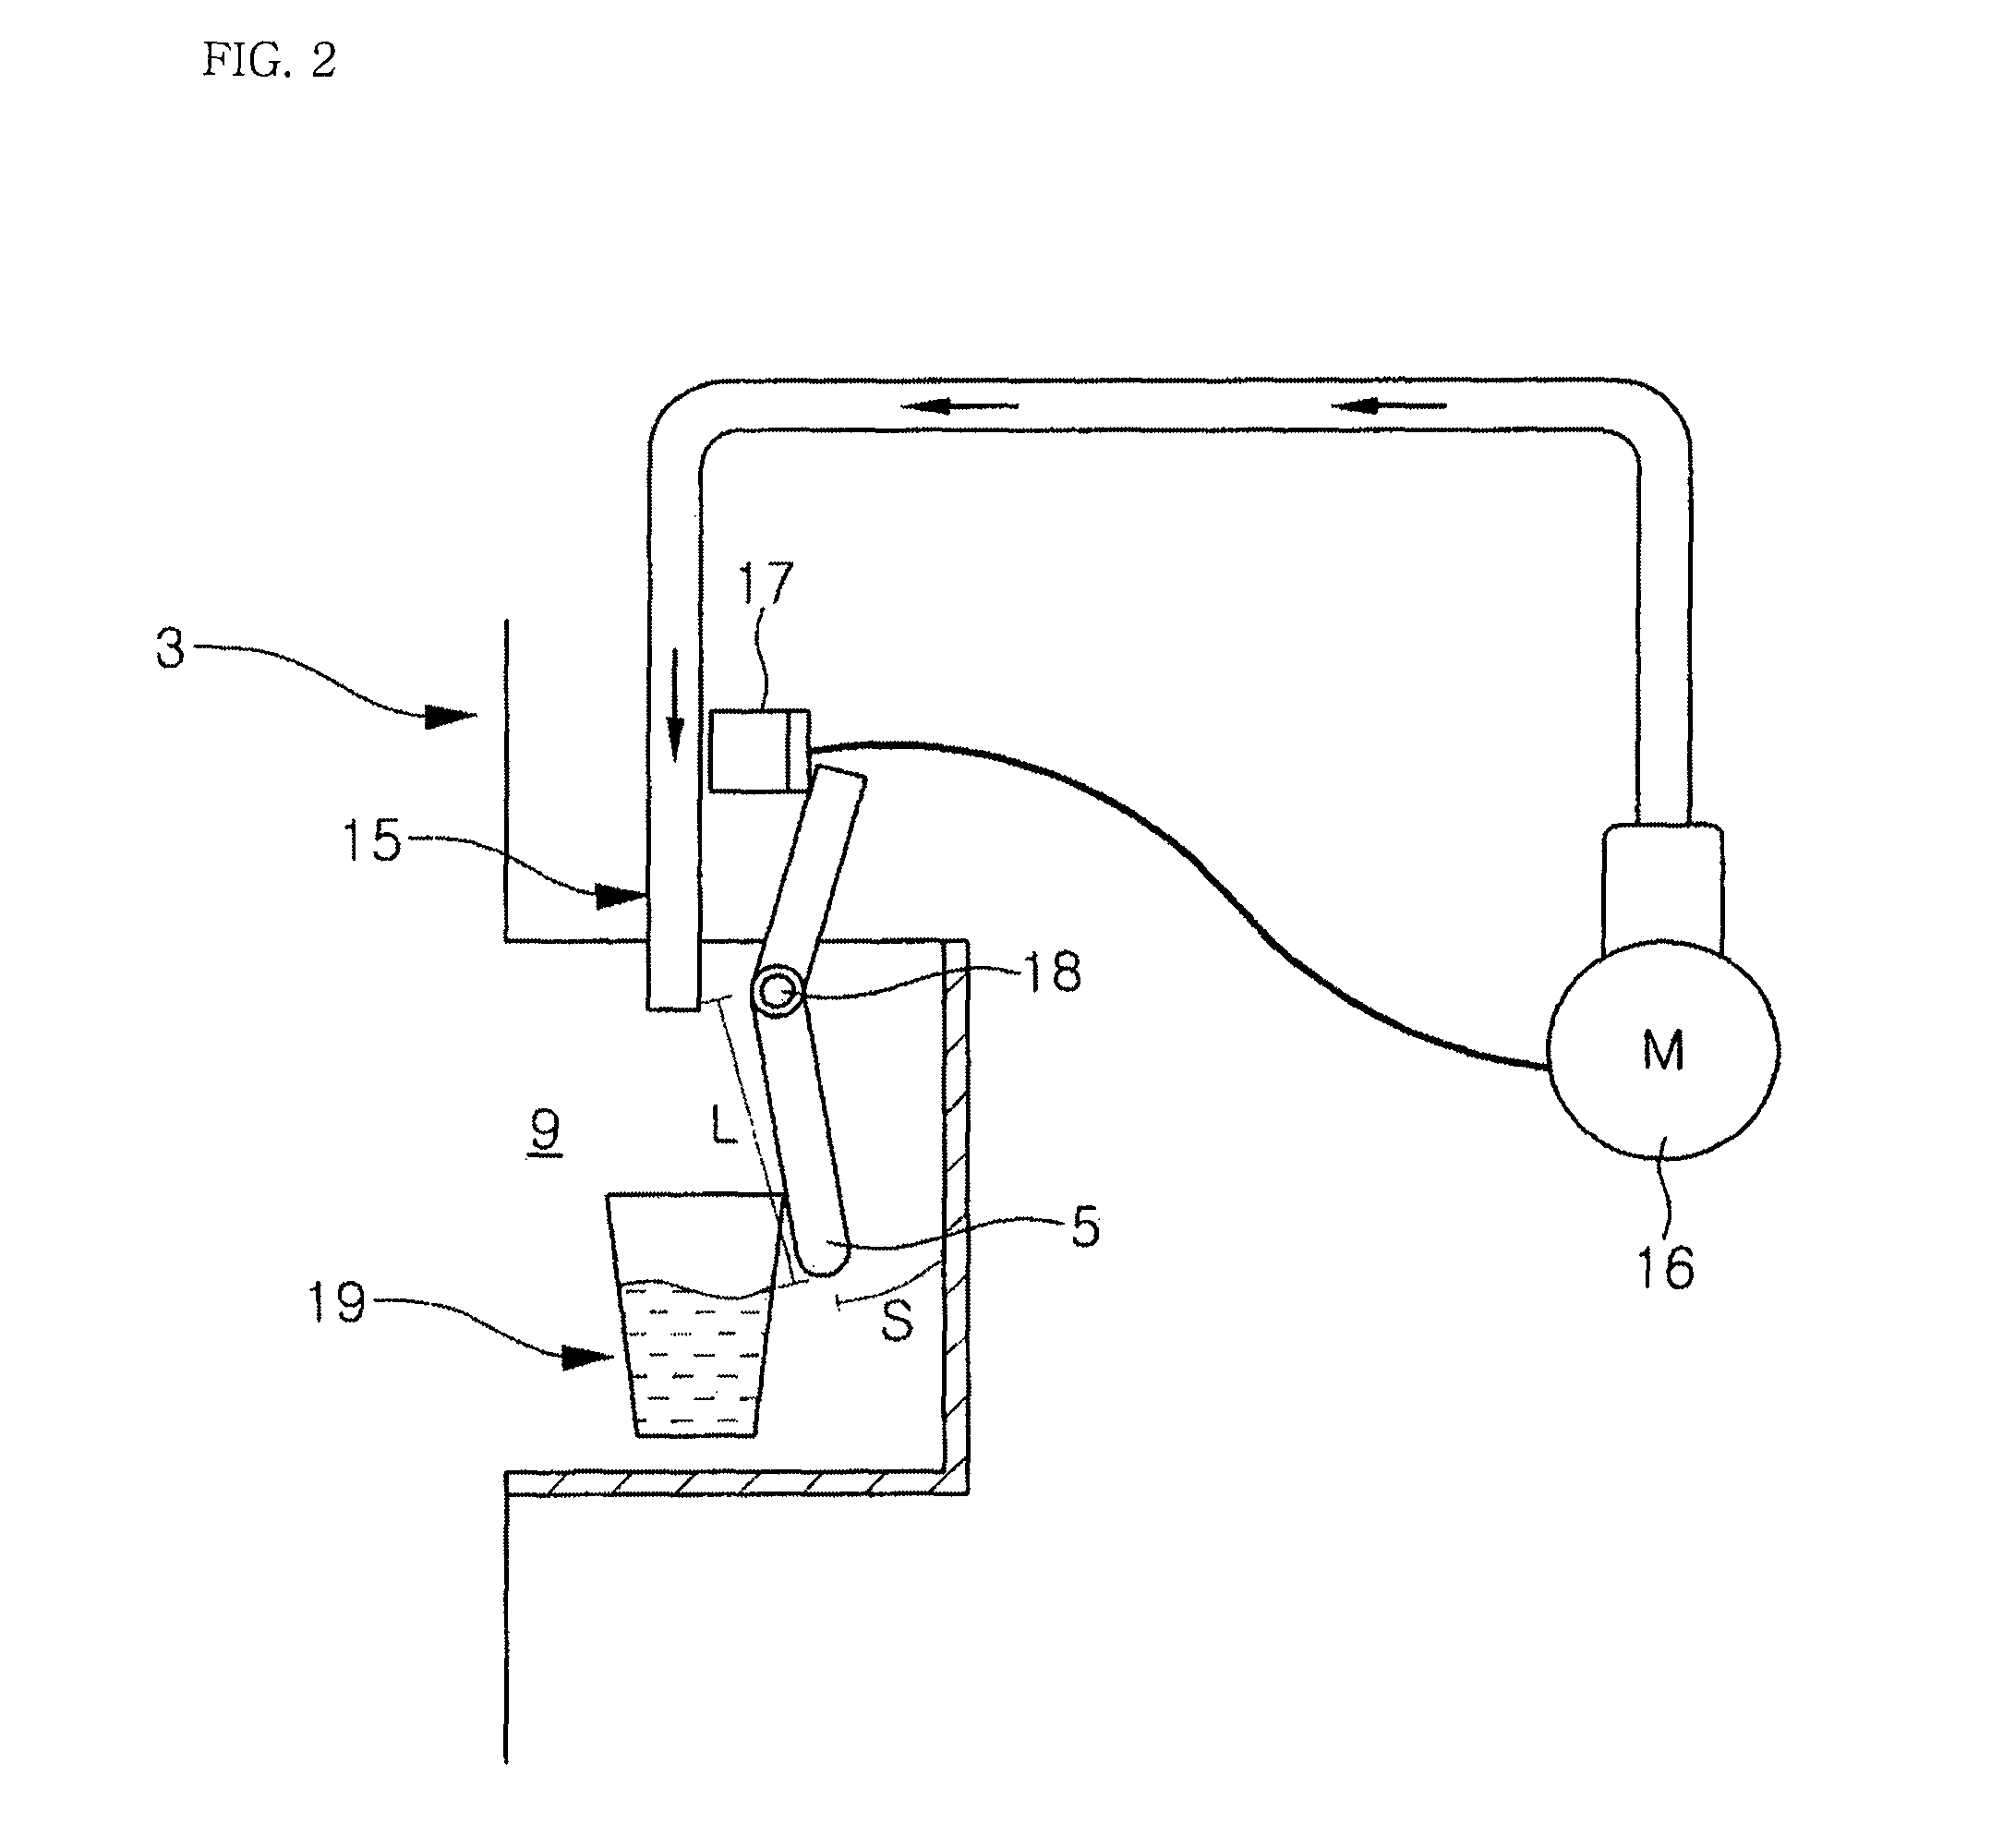 Switching apparatus of dispenser for refrigerator